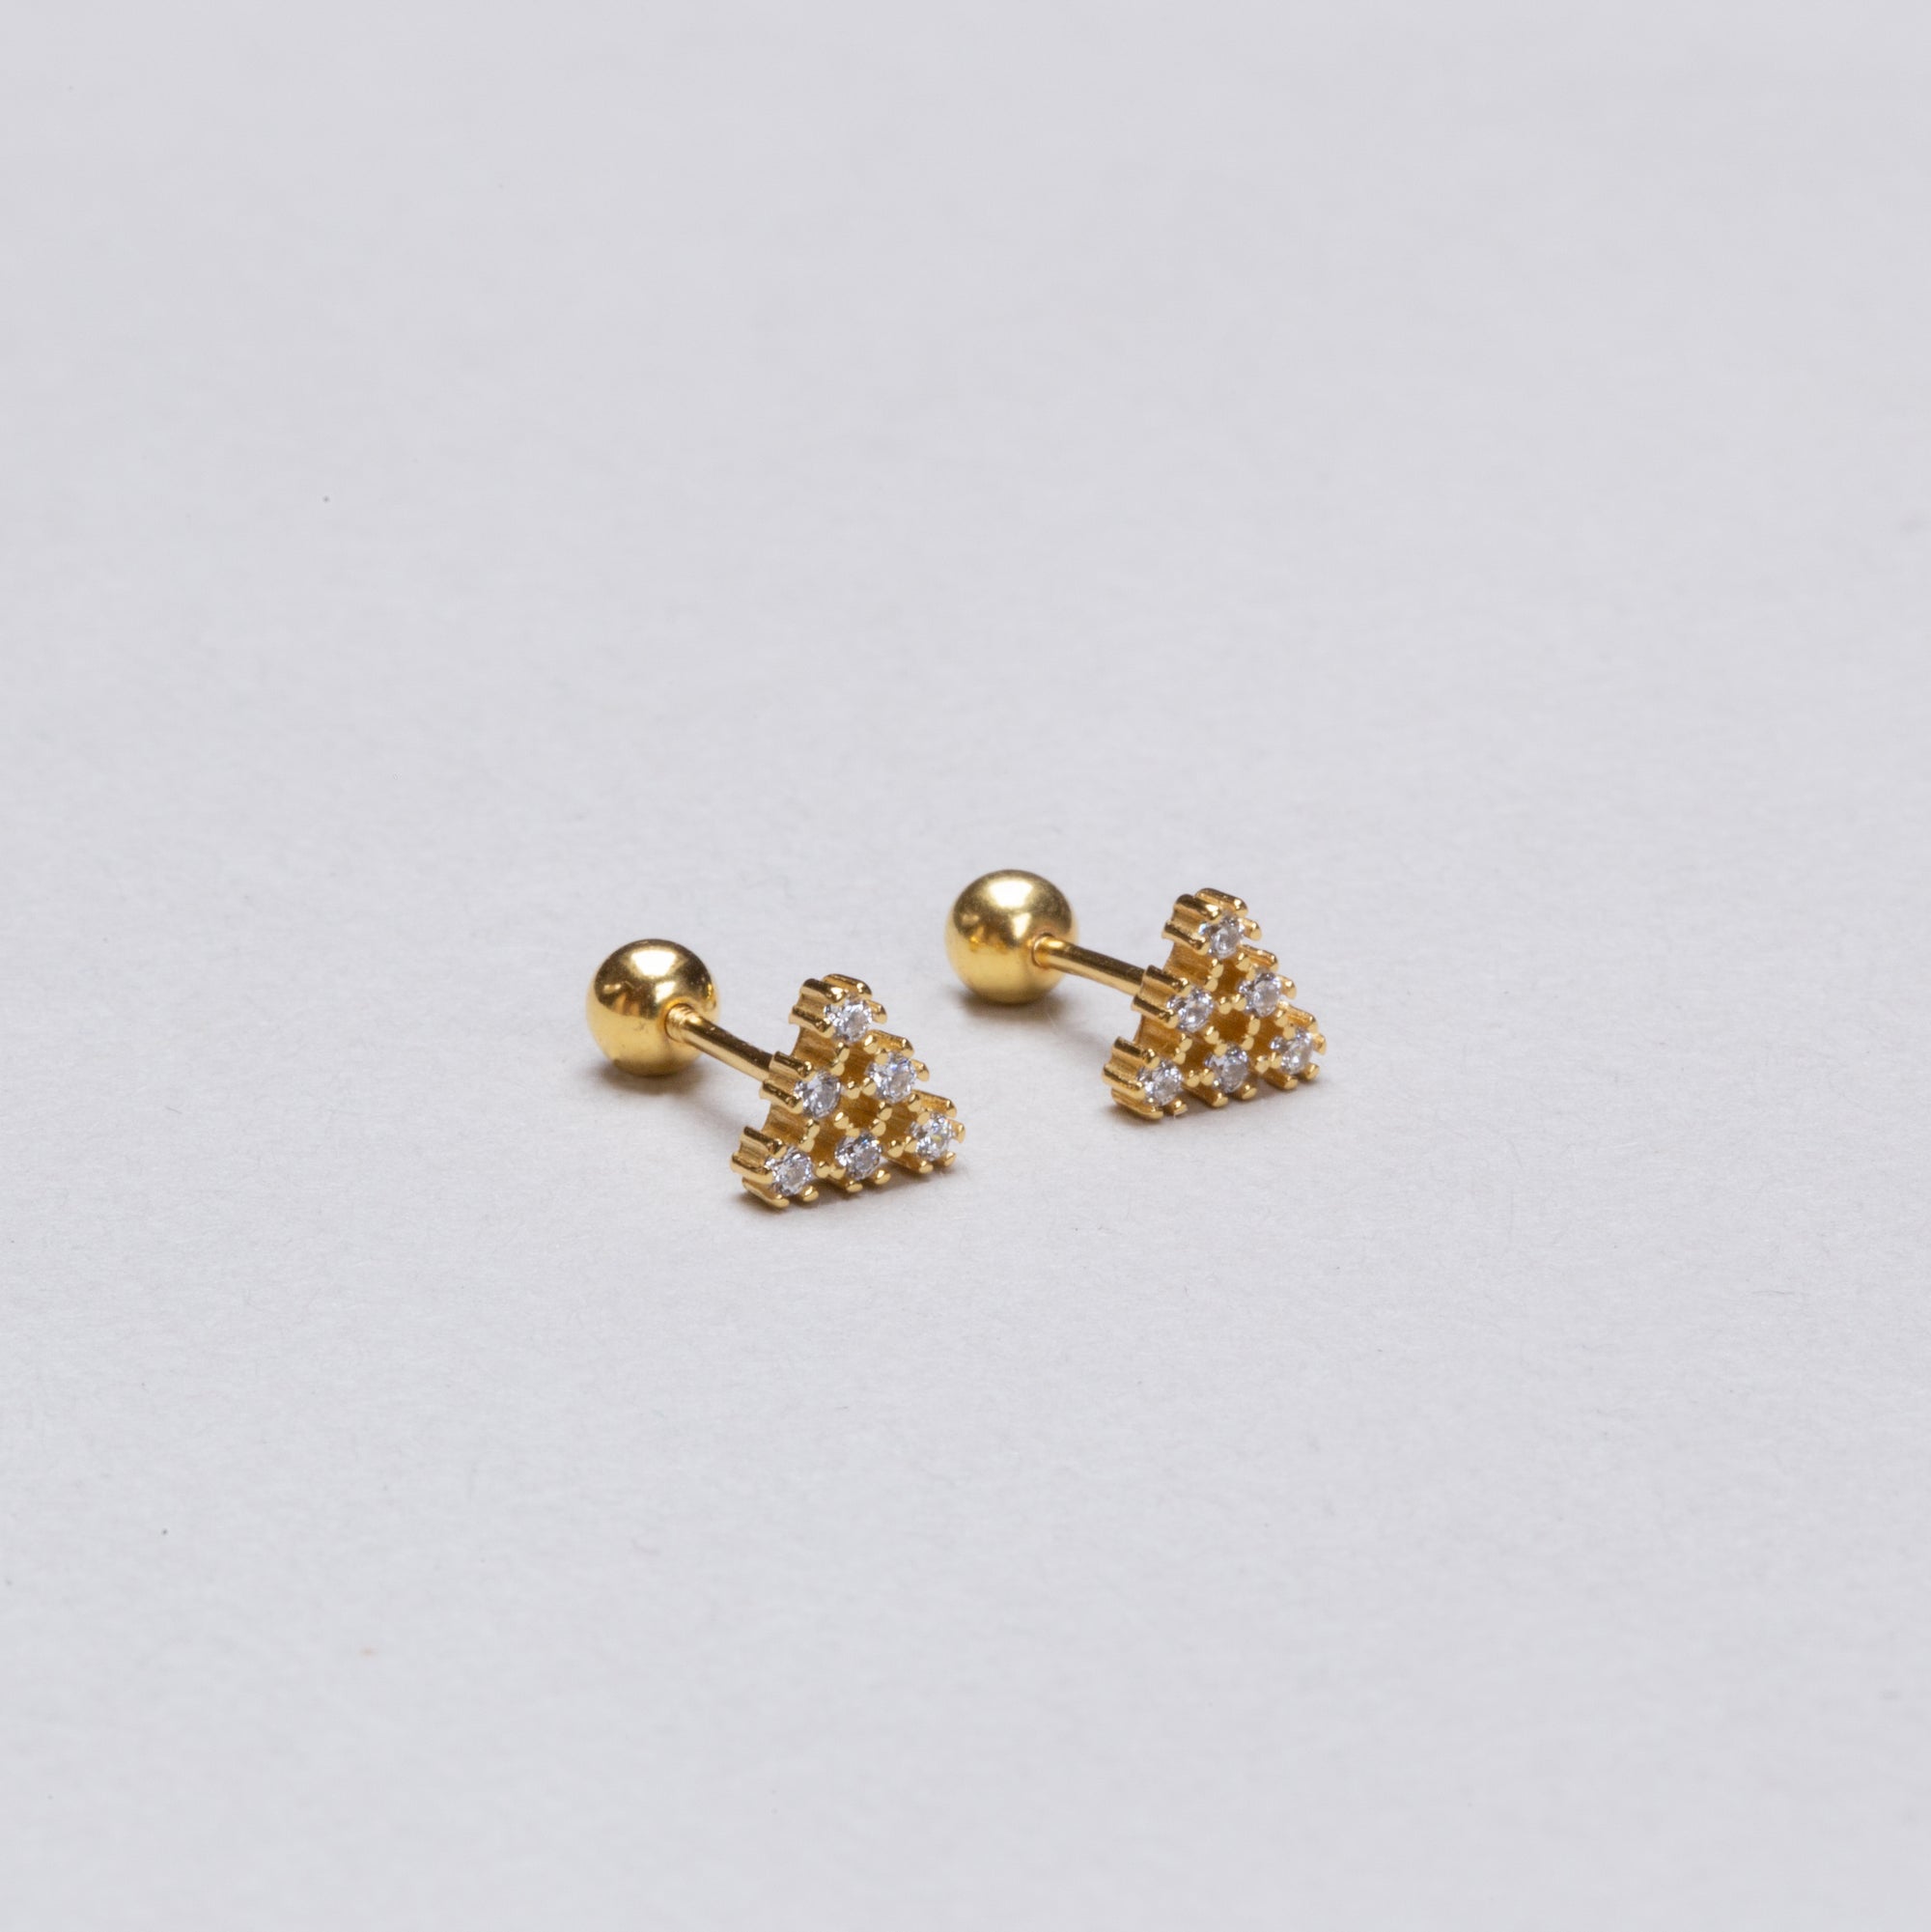 Gold-plated Triangle Stud Cartilage Earring